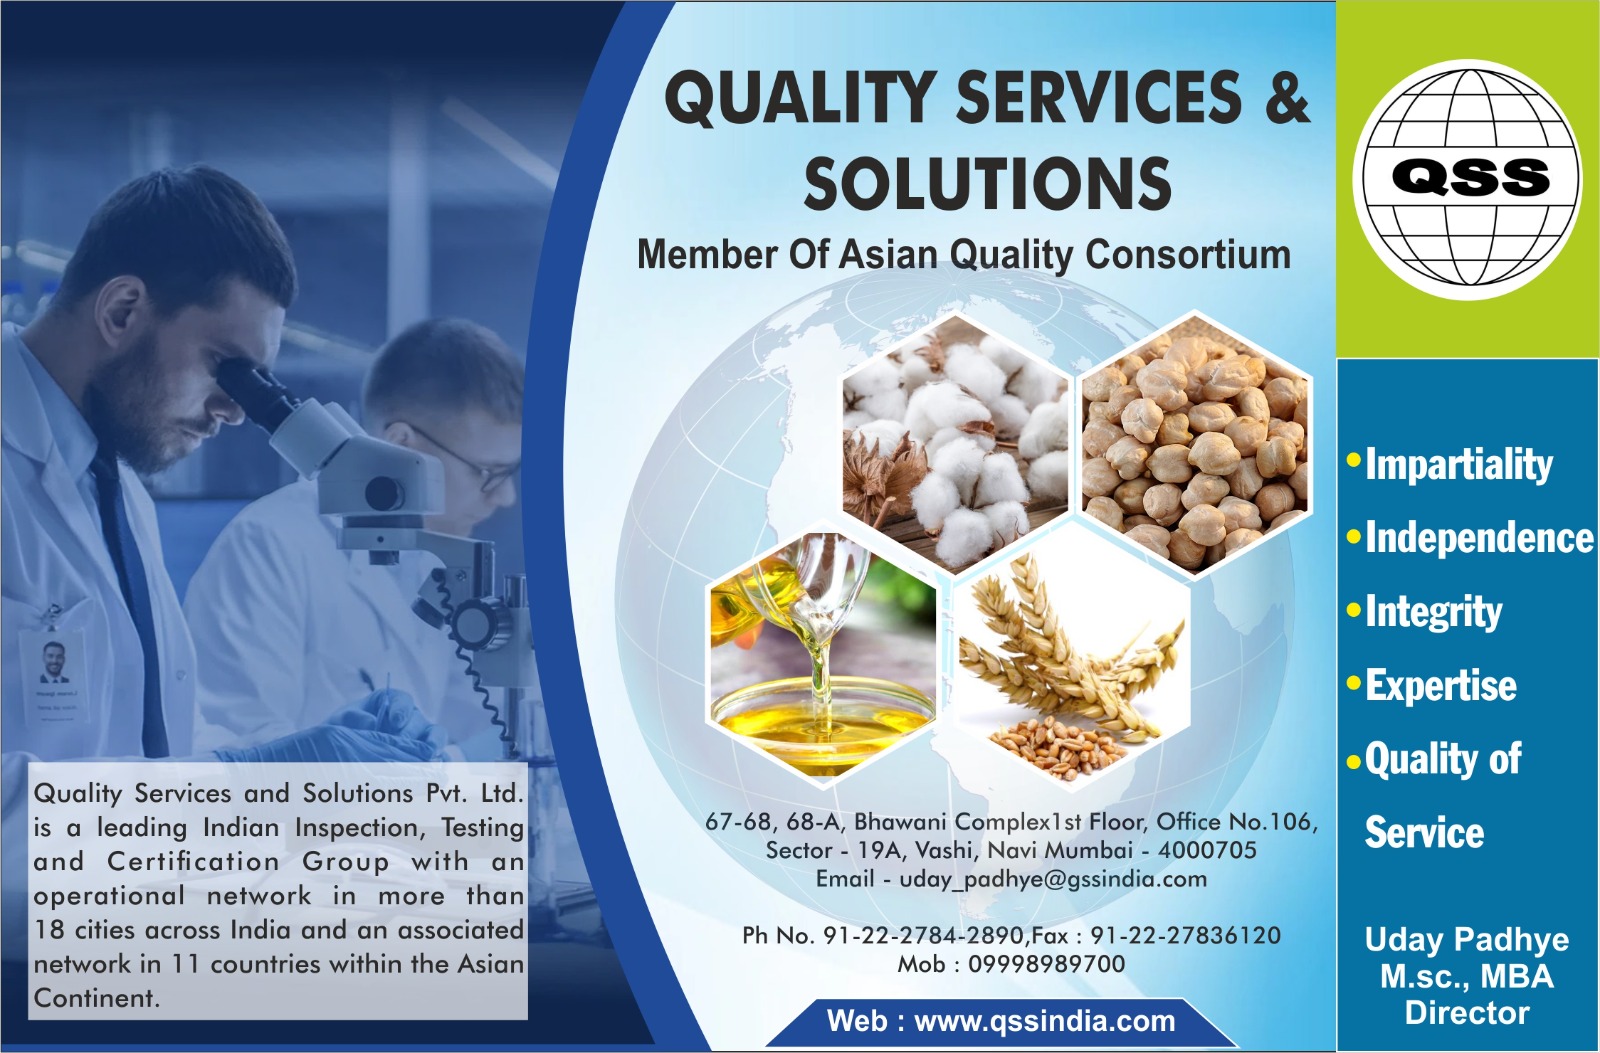 Quality Serveces and Solutions